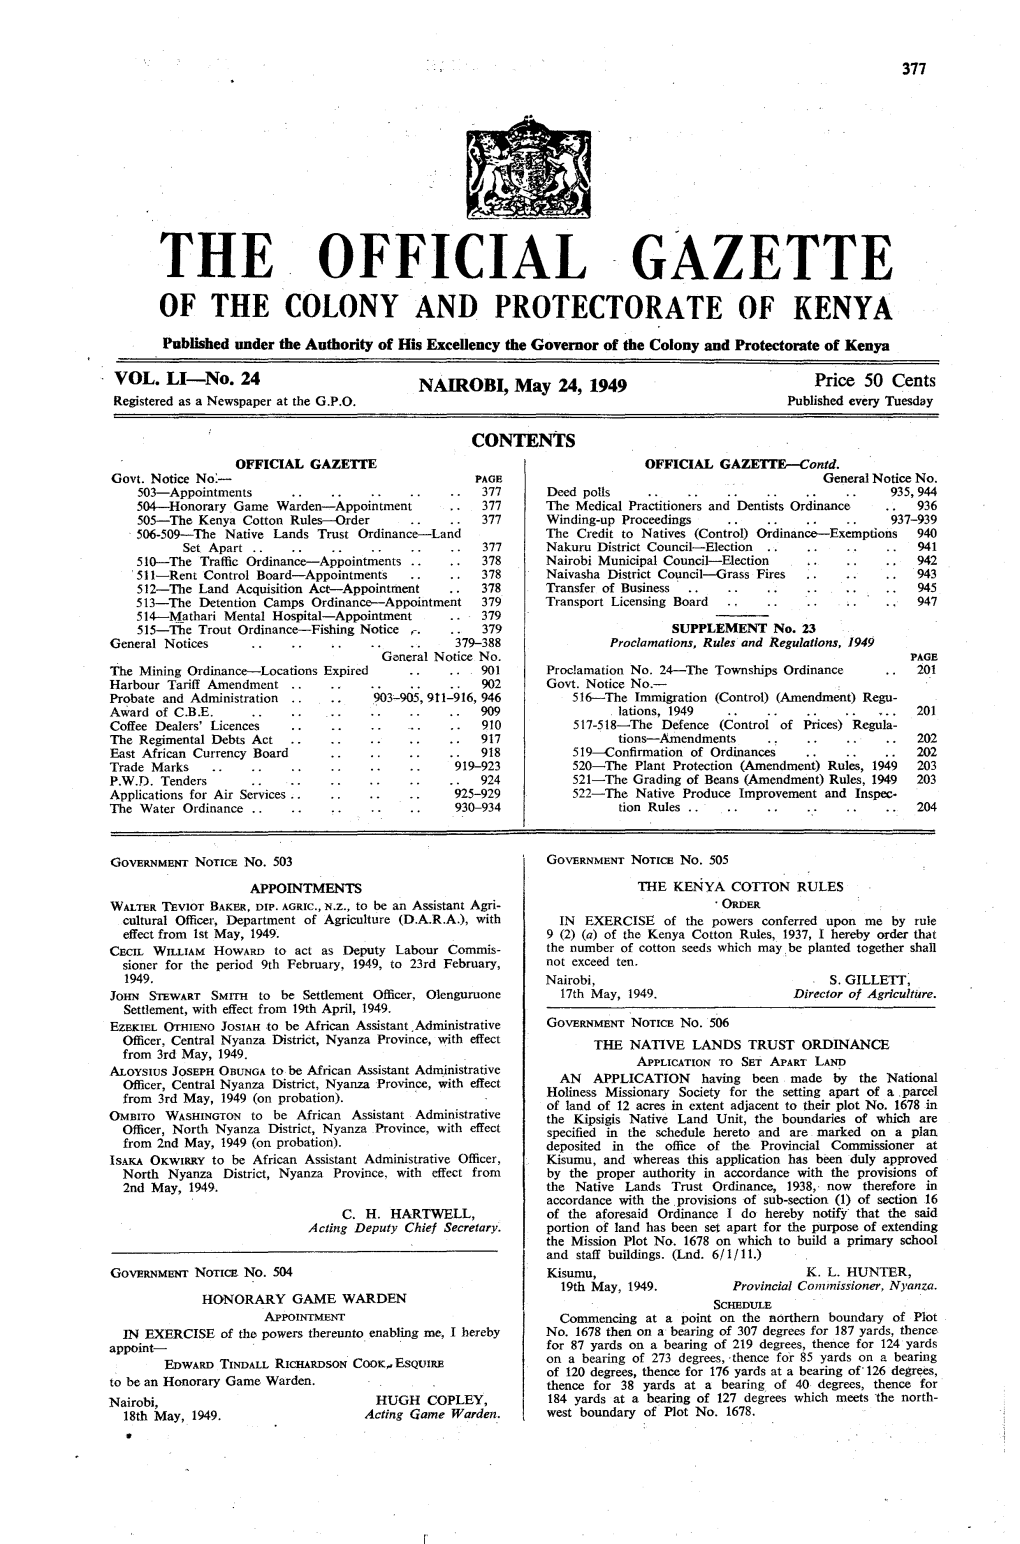 THE OFFICIAL GAZETTE of the COLONY and PROTECTORATE of KENYA Published Under the Authority of His Excellency the Governor of the Colony and Protectorate of Kenya